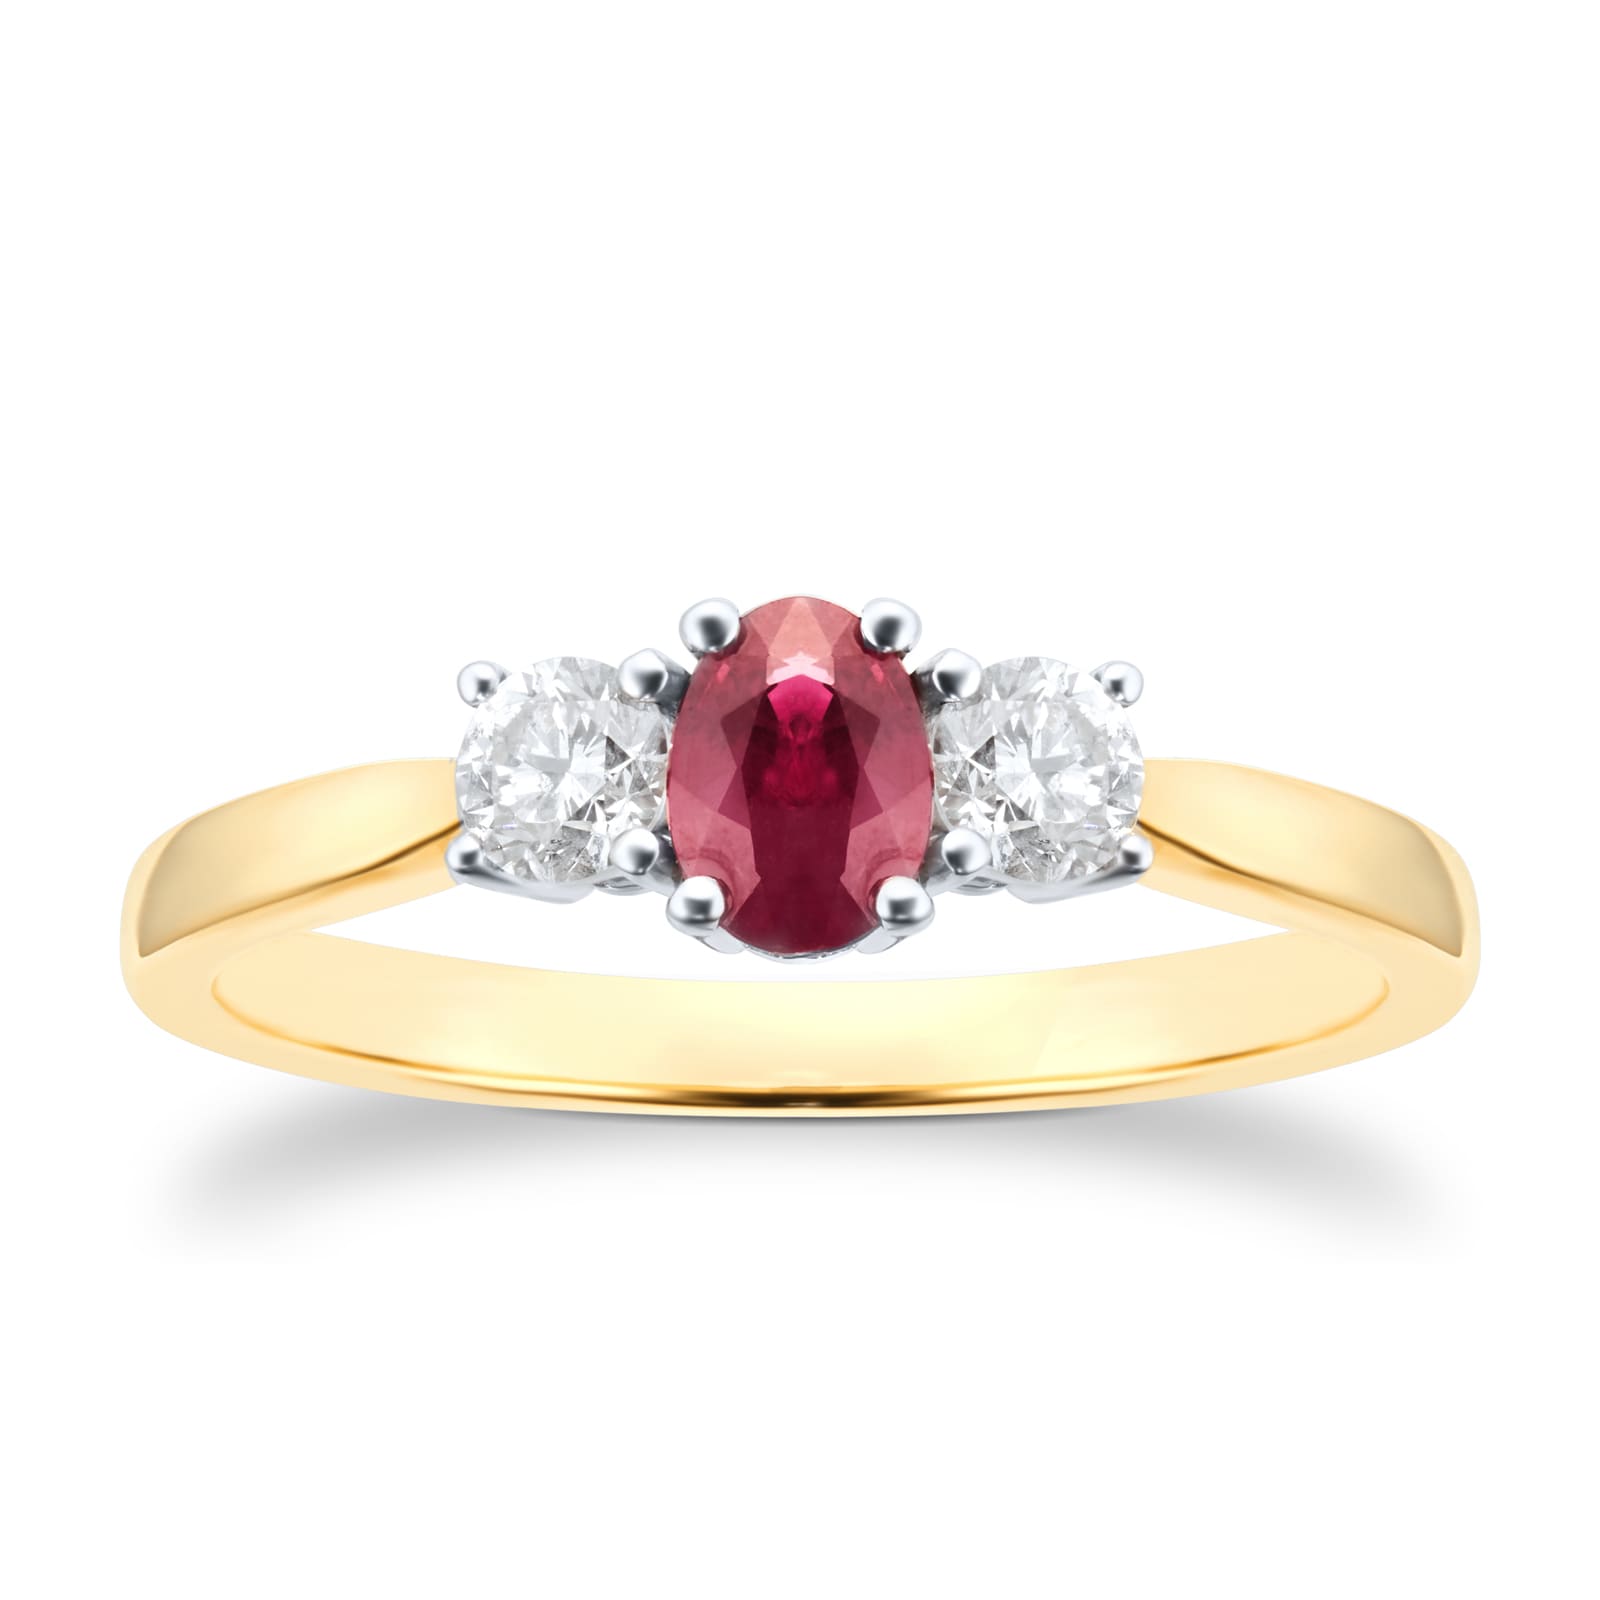 9ct Yellow and White Gold 3 Stone Ruby & Diamond Ring - Ring Size T